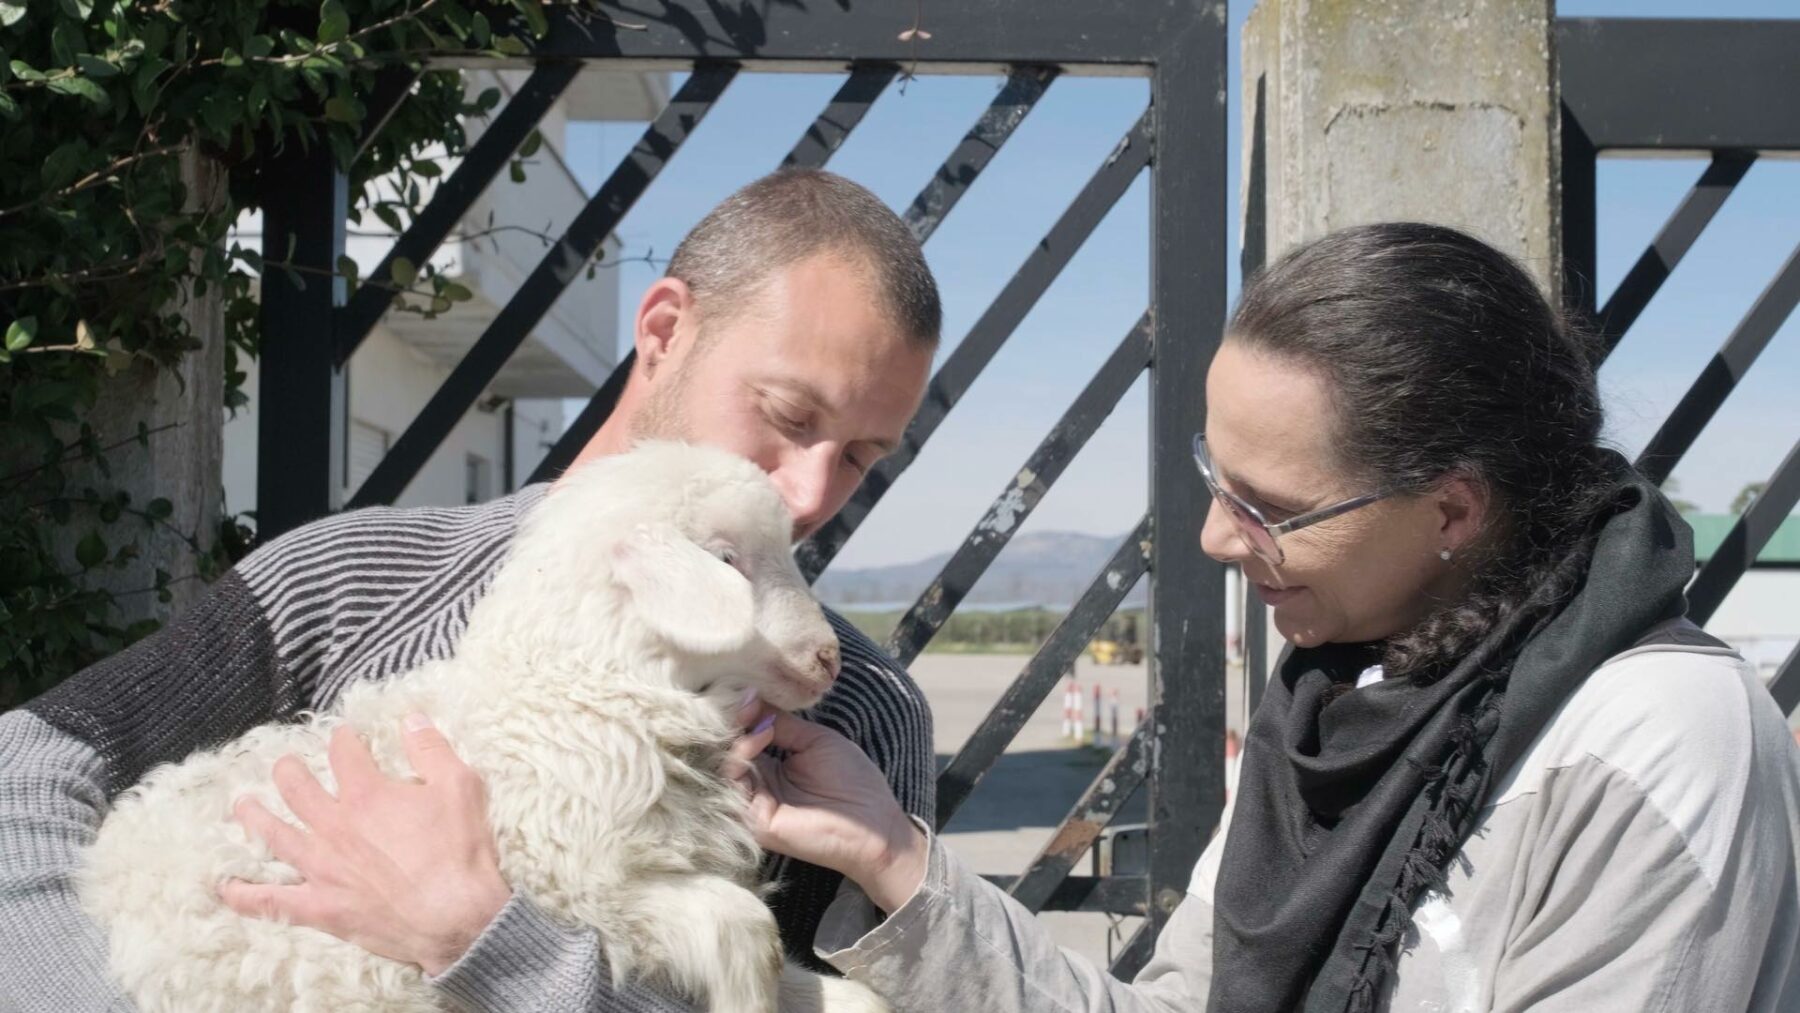 Rescuing a lamb from the slaughterhouse before Easter